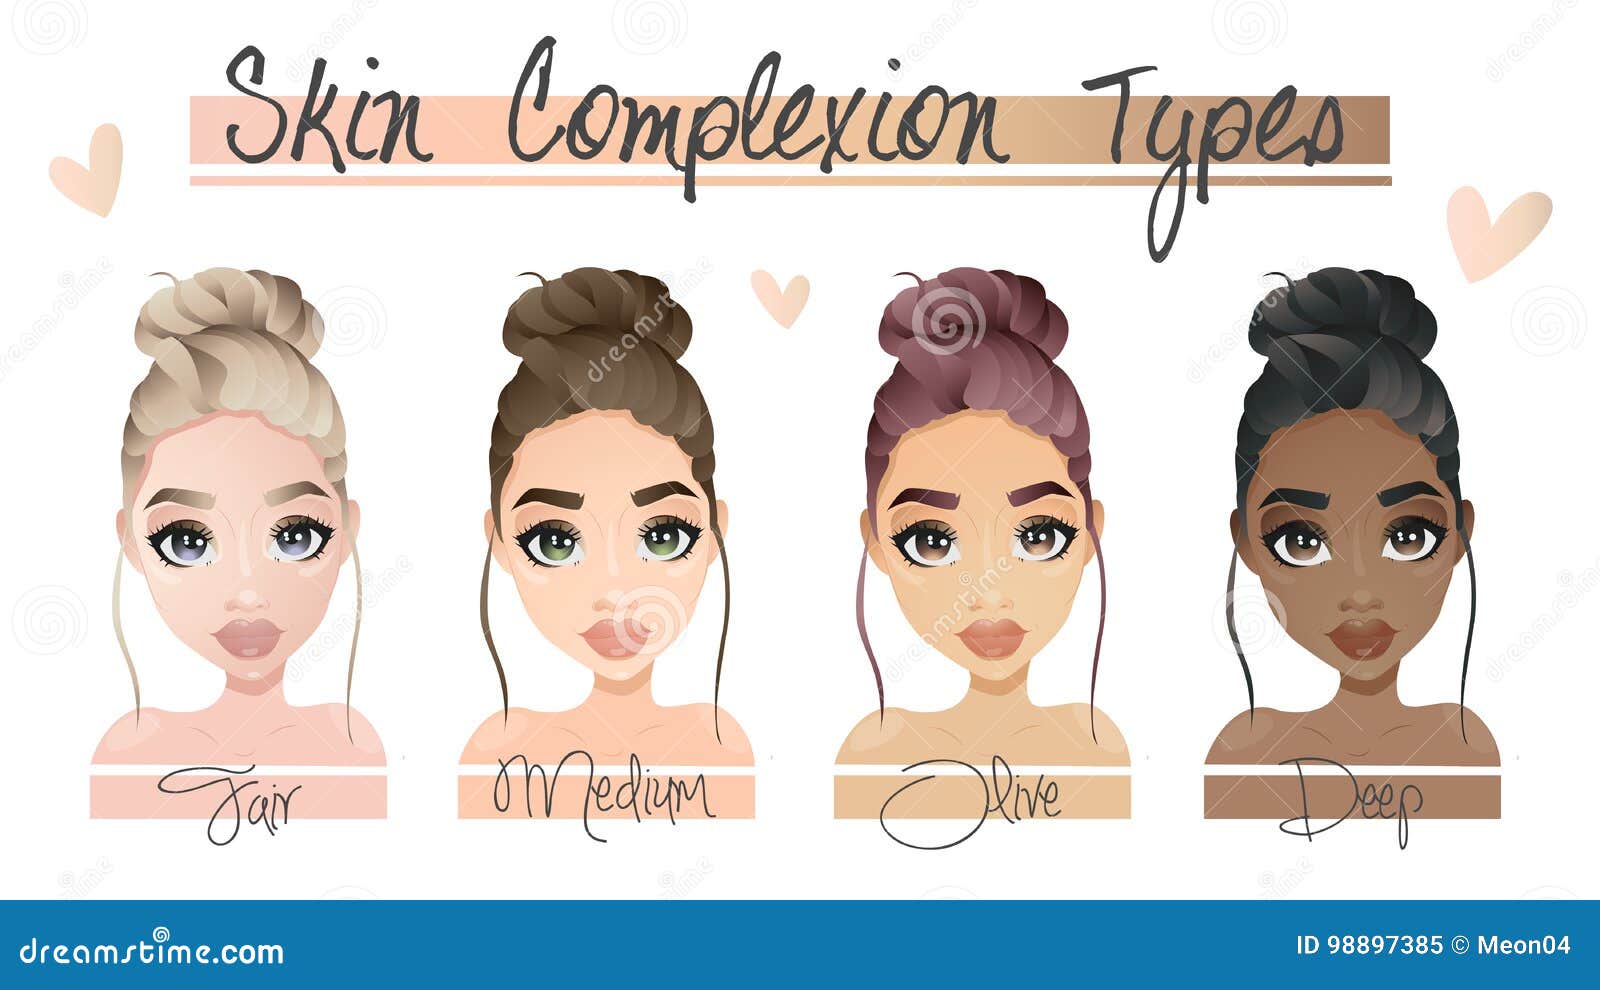 Skin Complexion Types